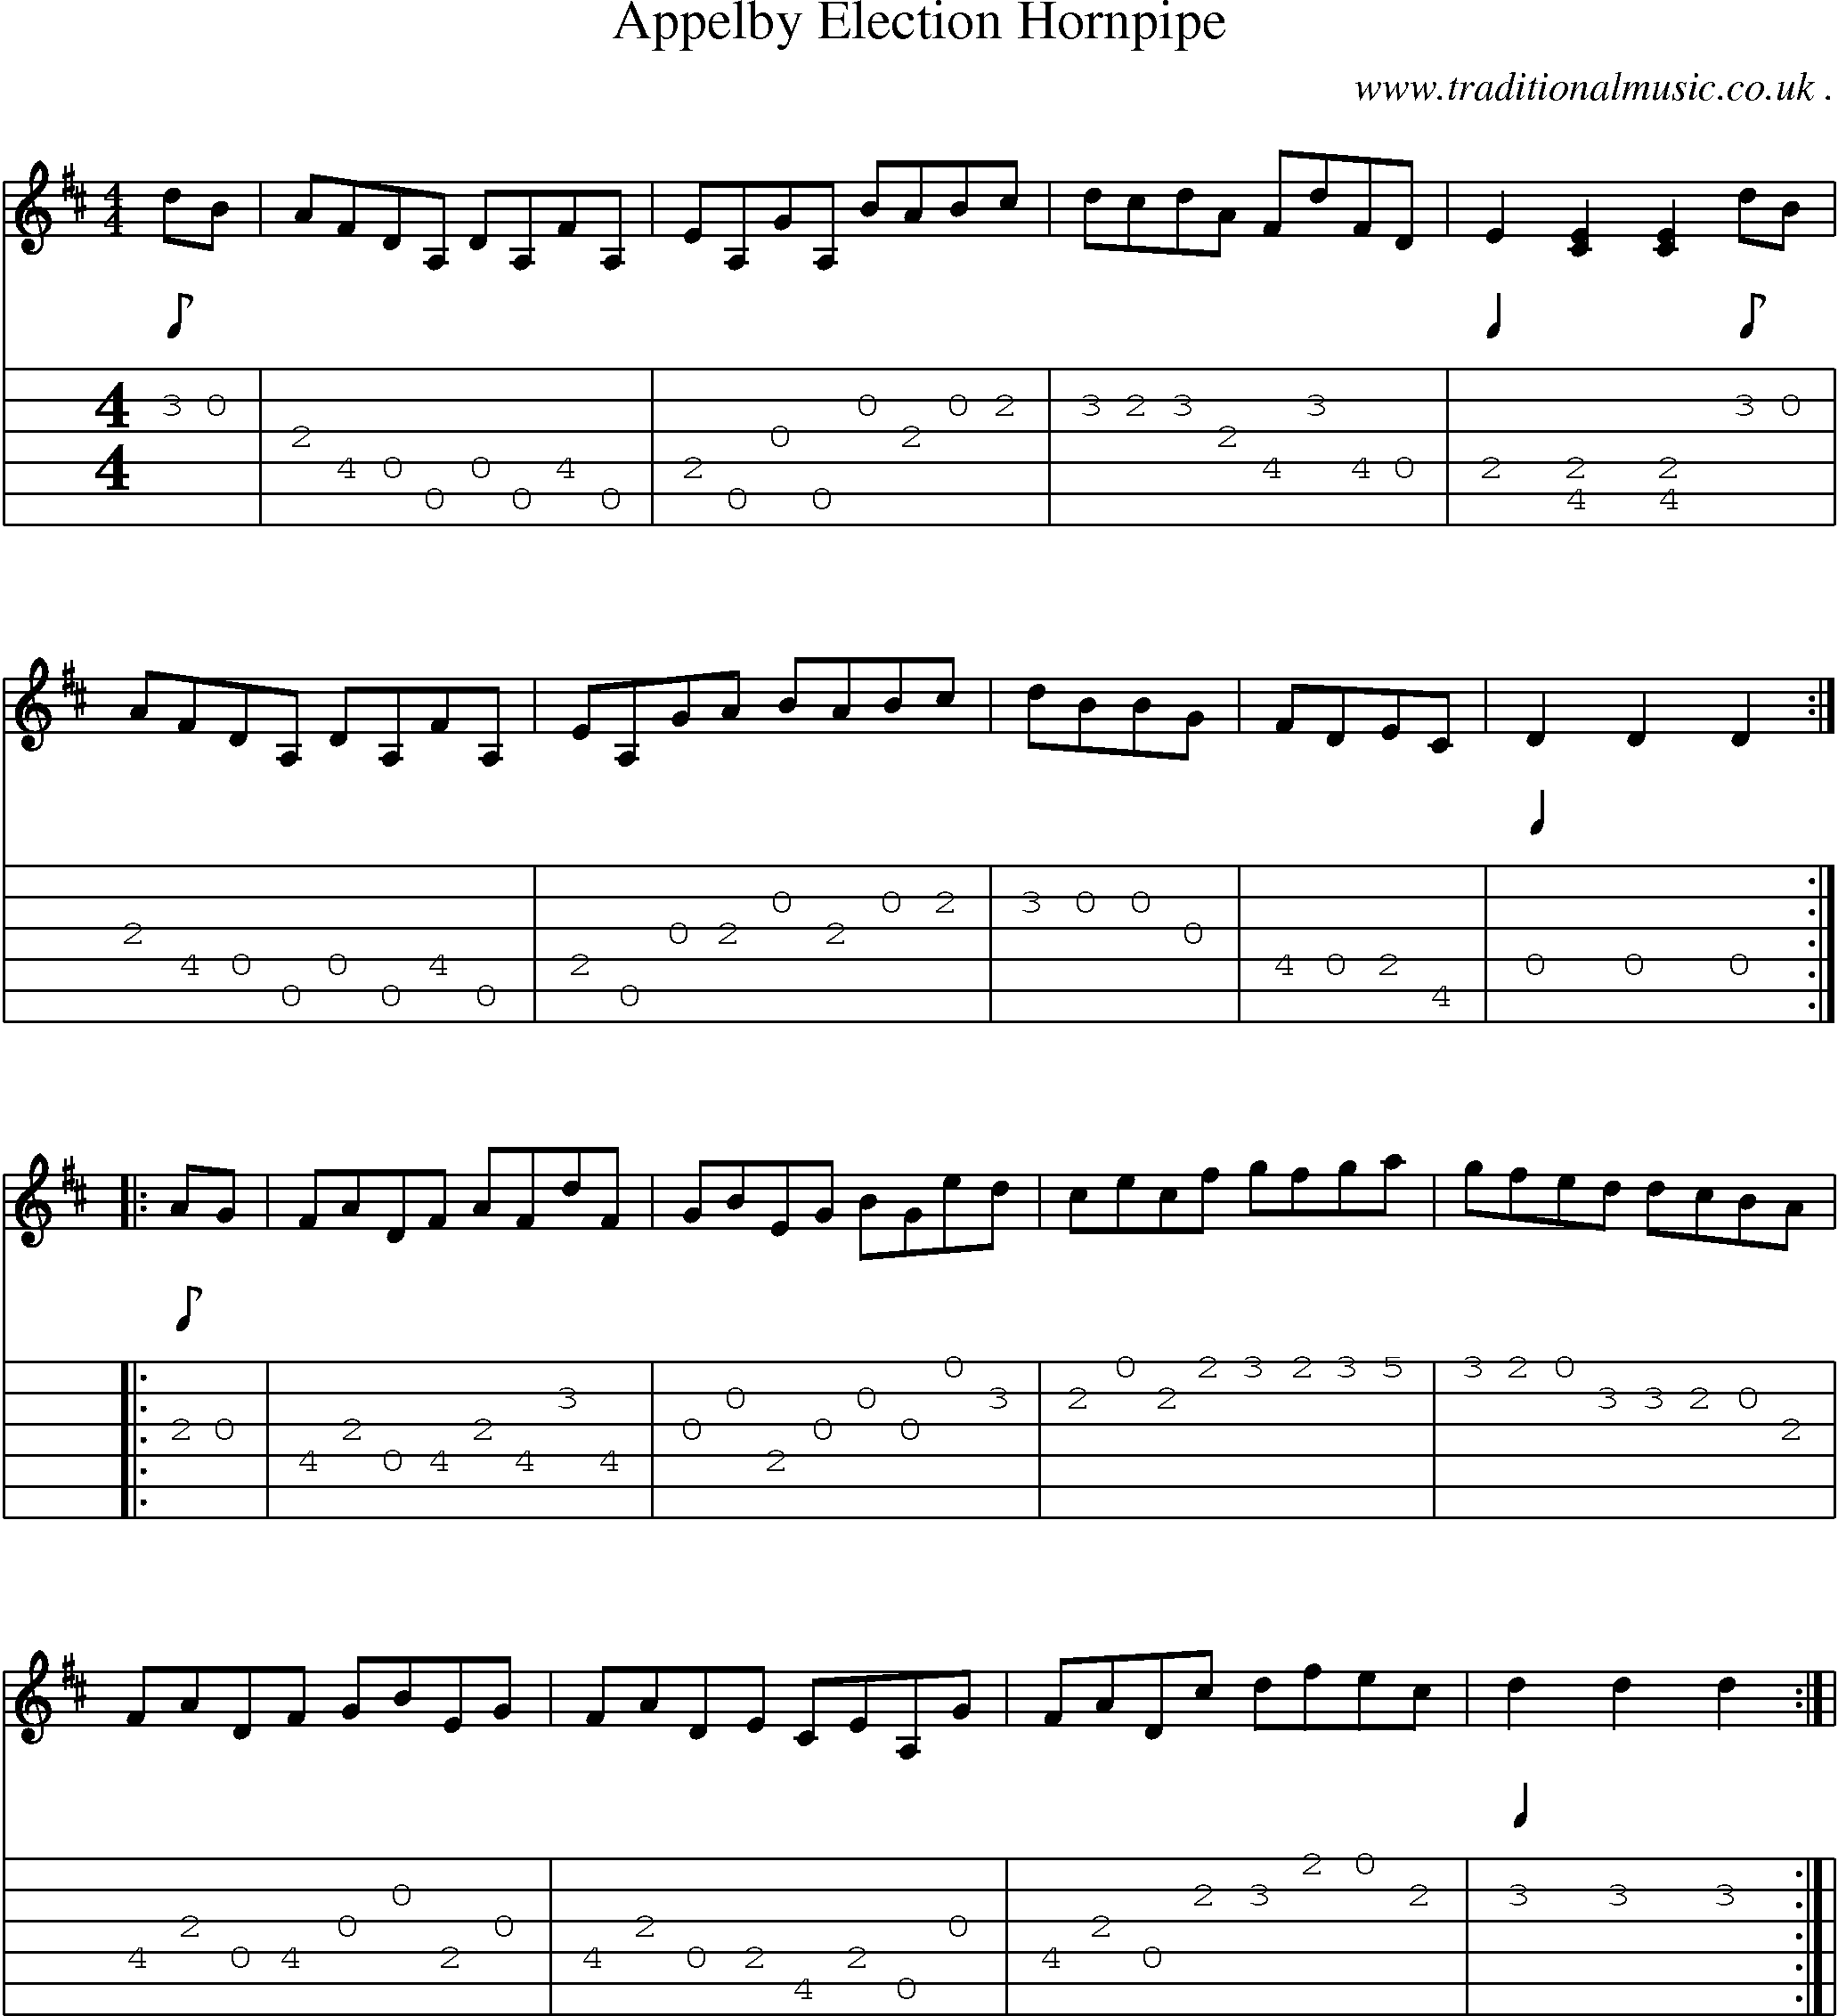 Sheet-Music and Guitar Tabs for Appelby Election Hornpipe